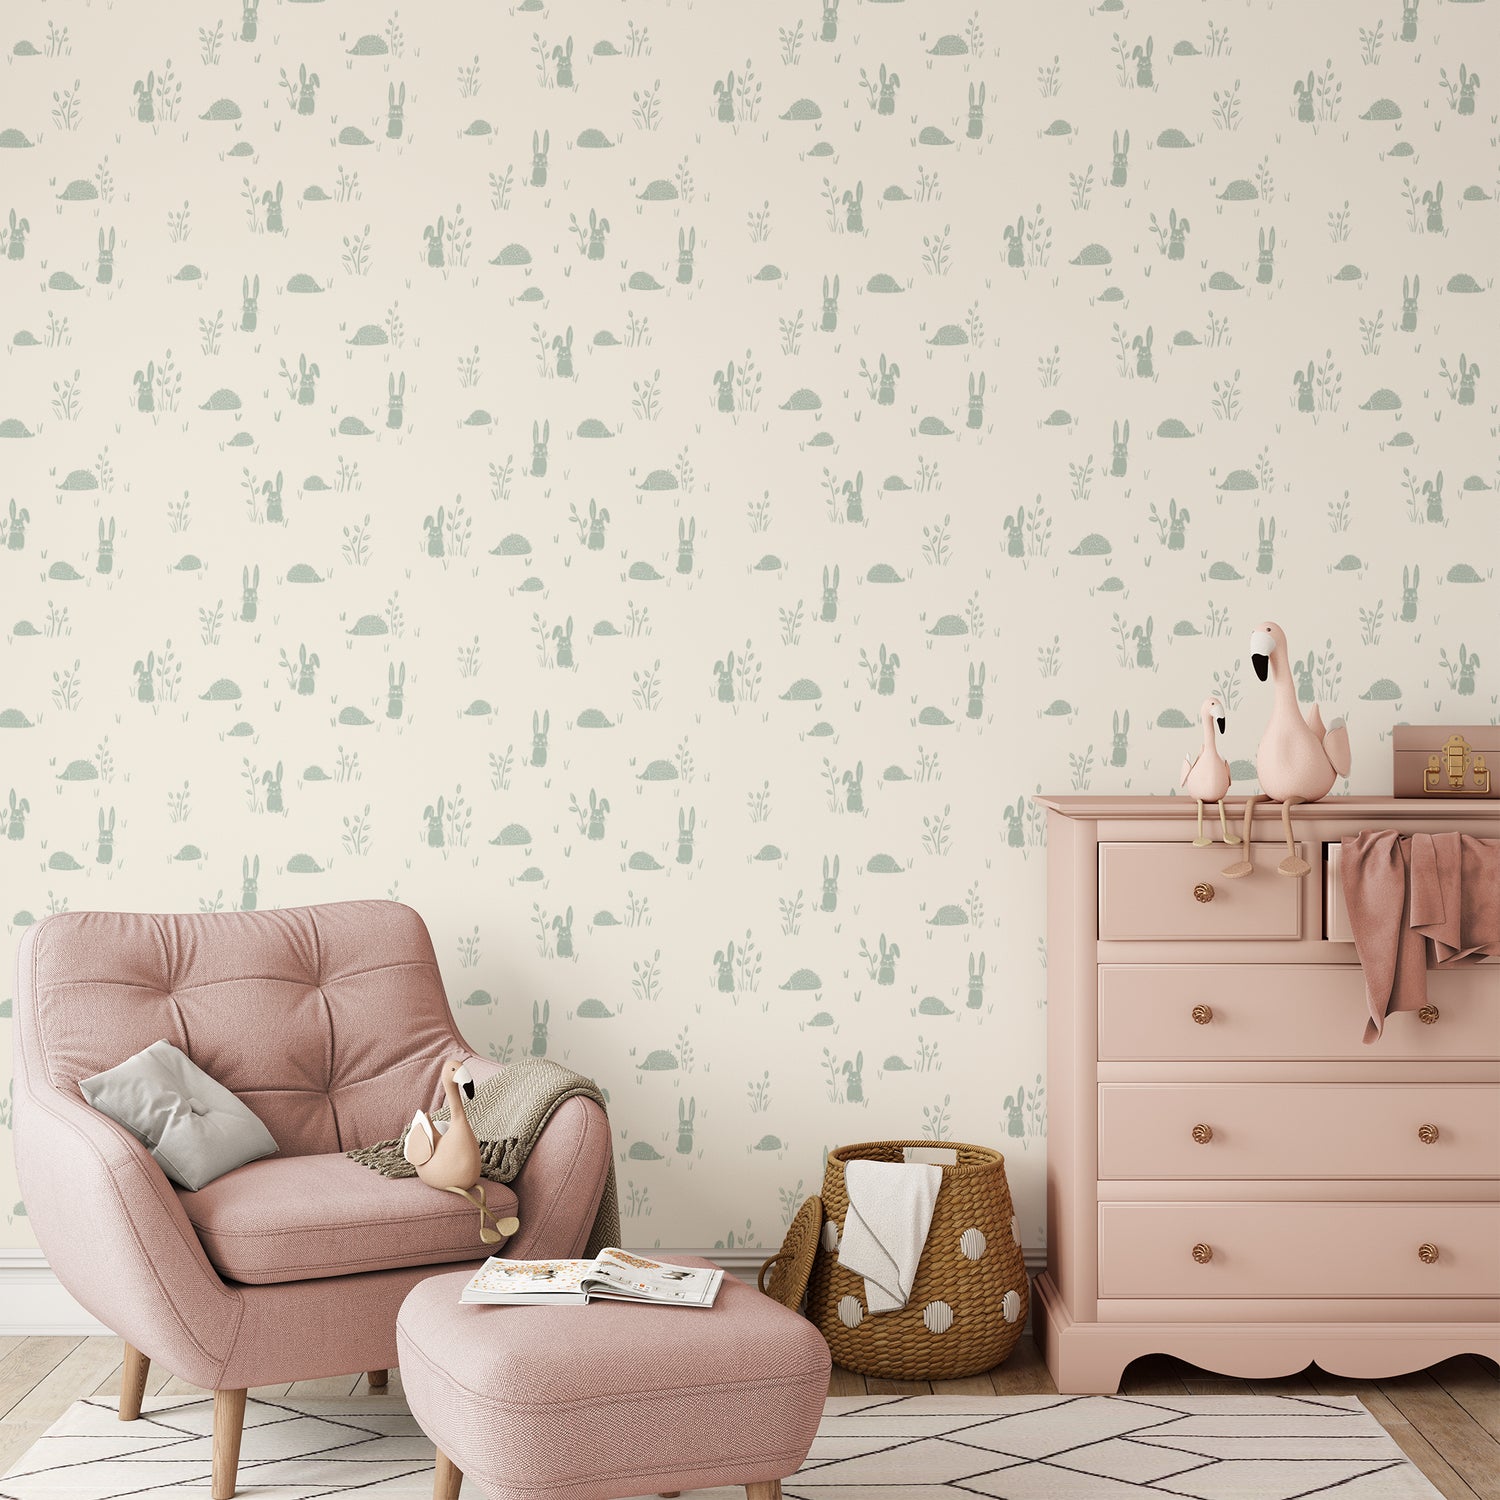 Hedgehogs and Rabbits Wallpaper in Sea Green shown in a nursery.